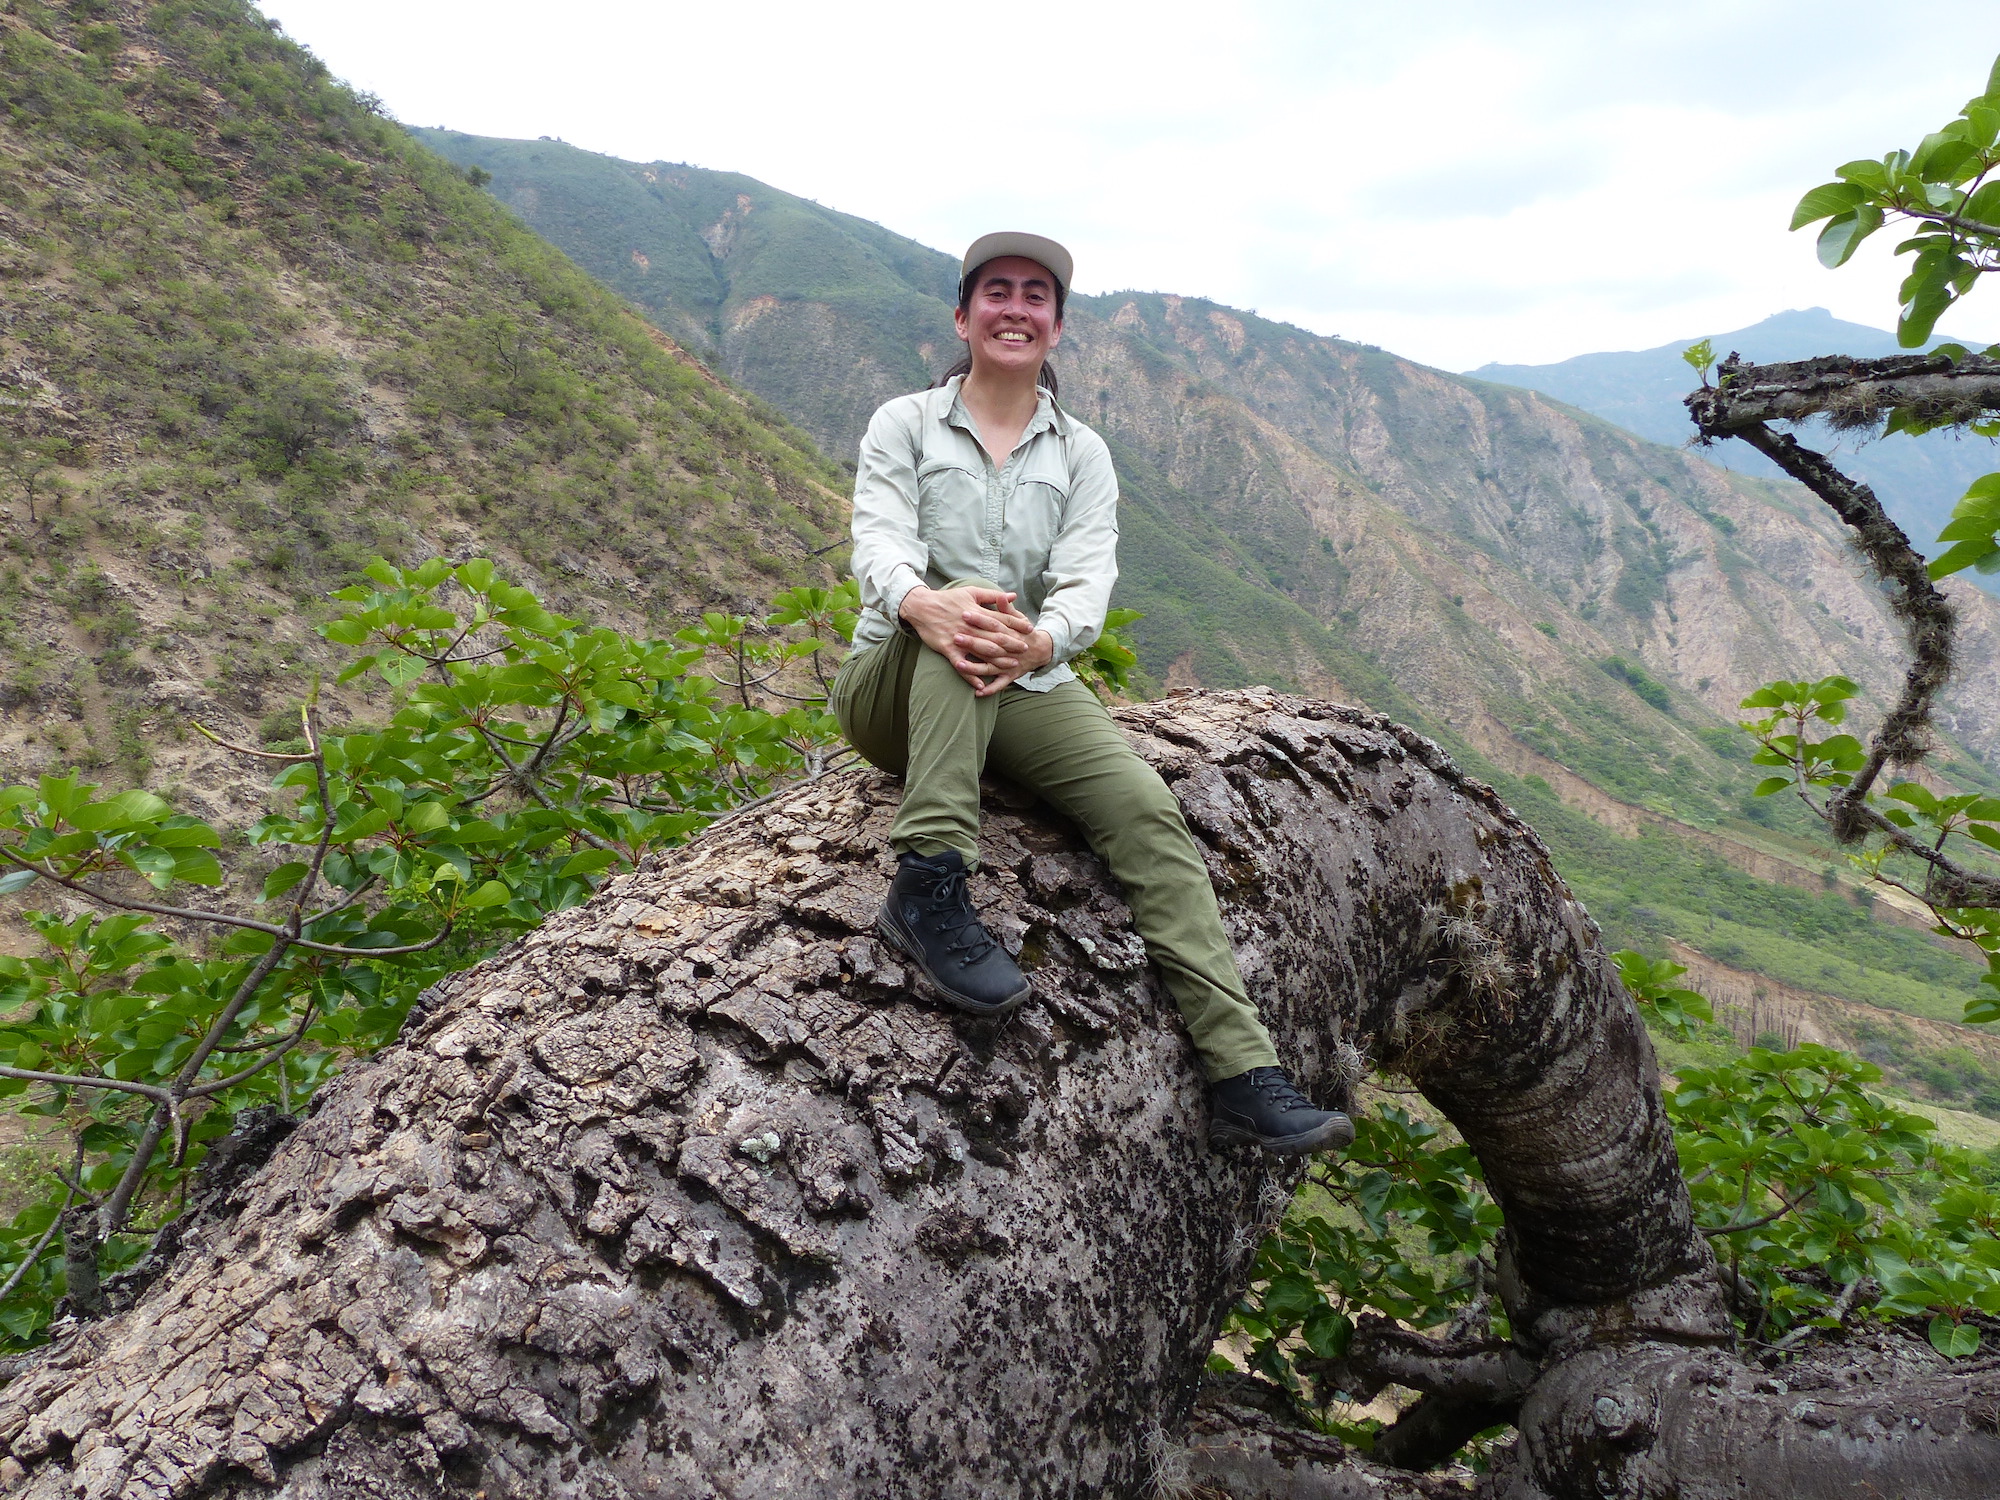 A woman in green pants and long-sleeve shirt sits smiling on an enormous, curved tree trunk against the backdrop of a canyon full of vegetation.